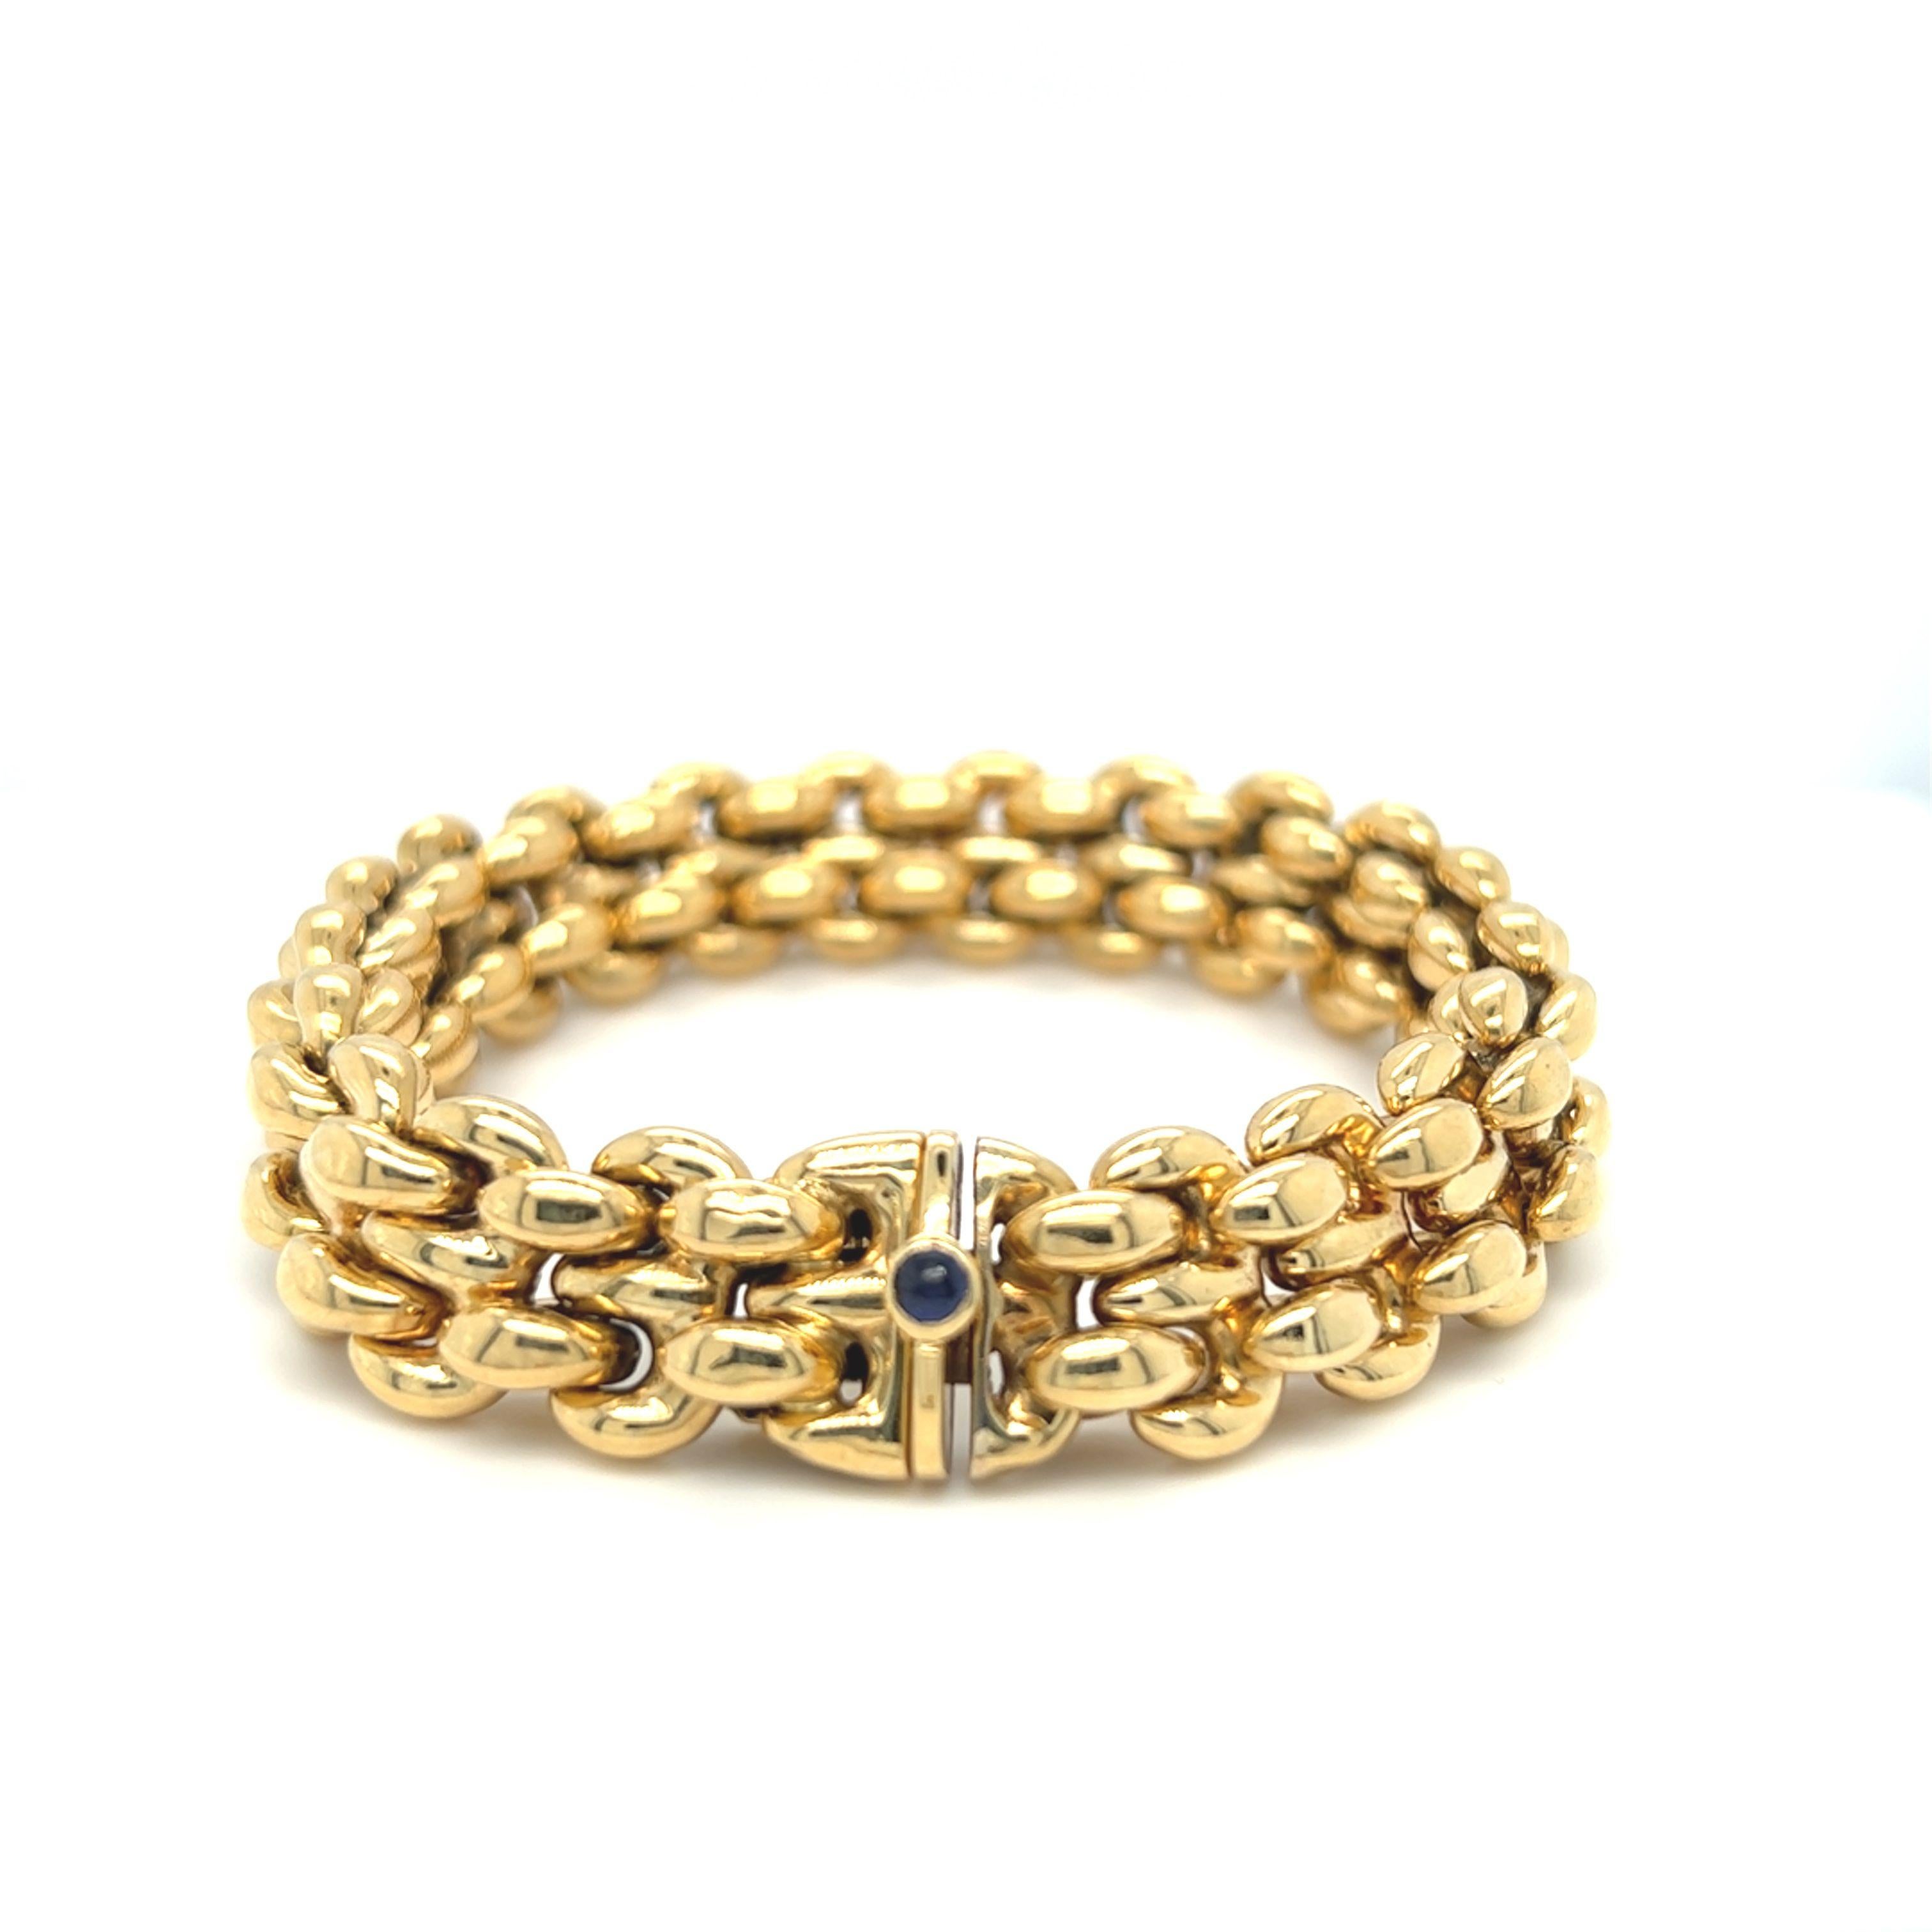 An Italian design with a contemporary feel, this 18K yellow gold bracelet has rounded double links alternating with connecting links. The clasp is decorated with a round cabochon cut sapphire with a deep navy blue color. The bracelet is 7 inches